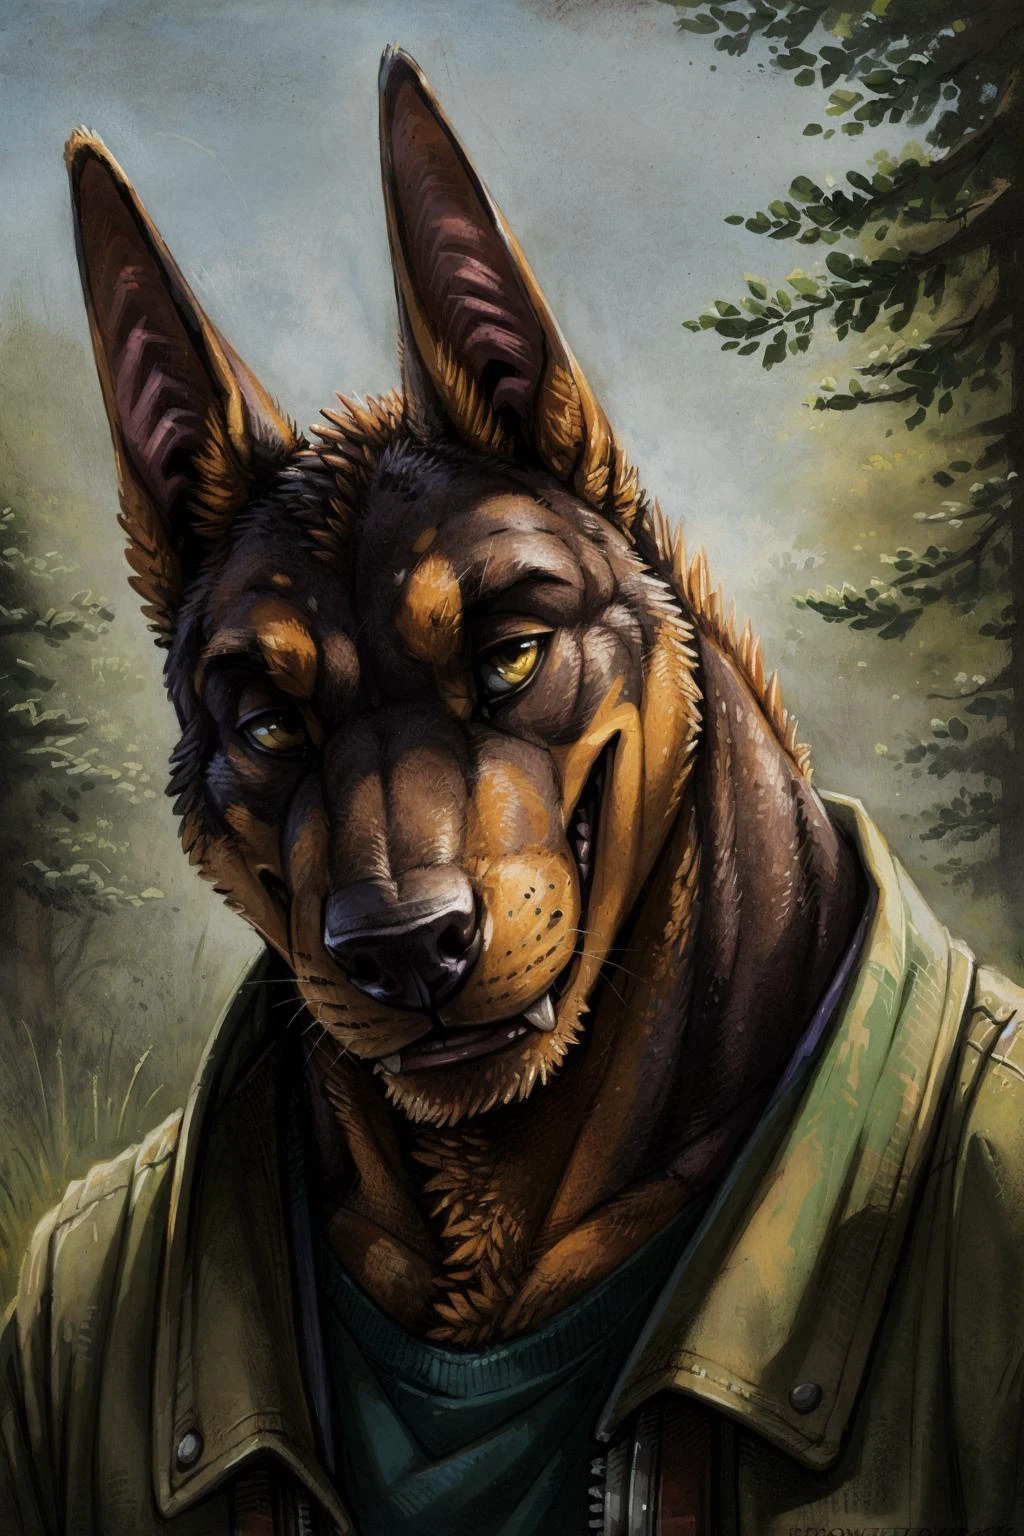 uploaded on e621, (by tojo the thief, by narse, by wfa, by RrowdyBeast, by Kenket), HDR, masterpiece, anthro dobermann-wolf hybrid male portrait